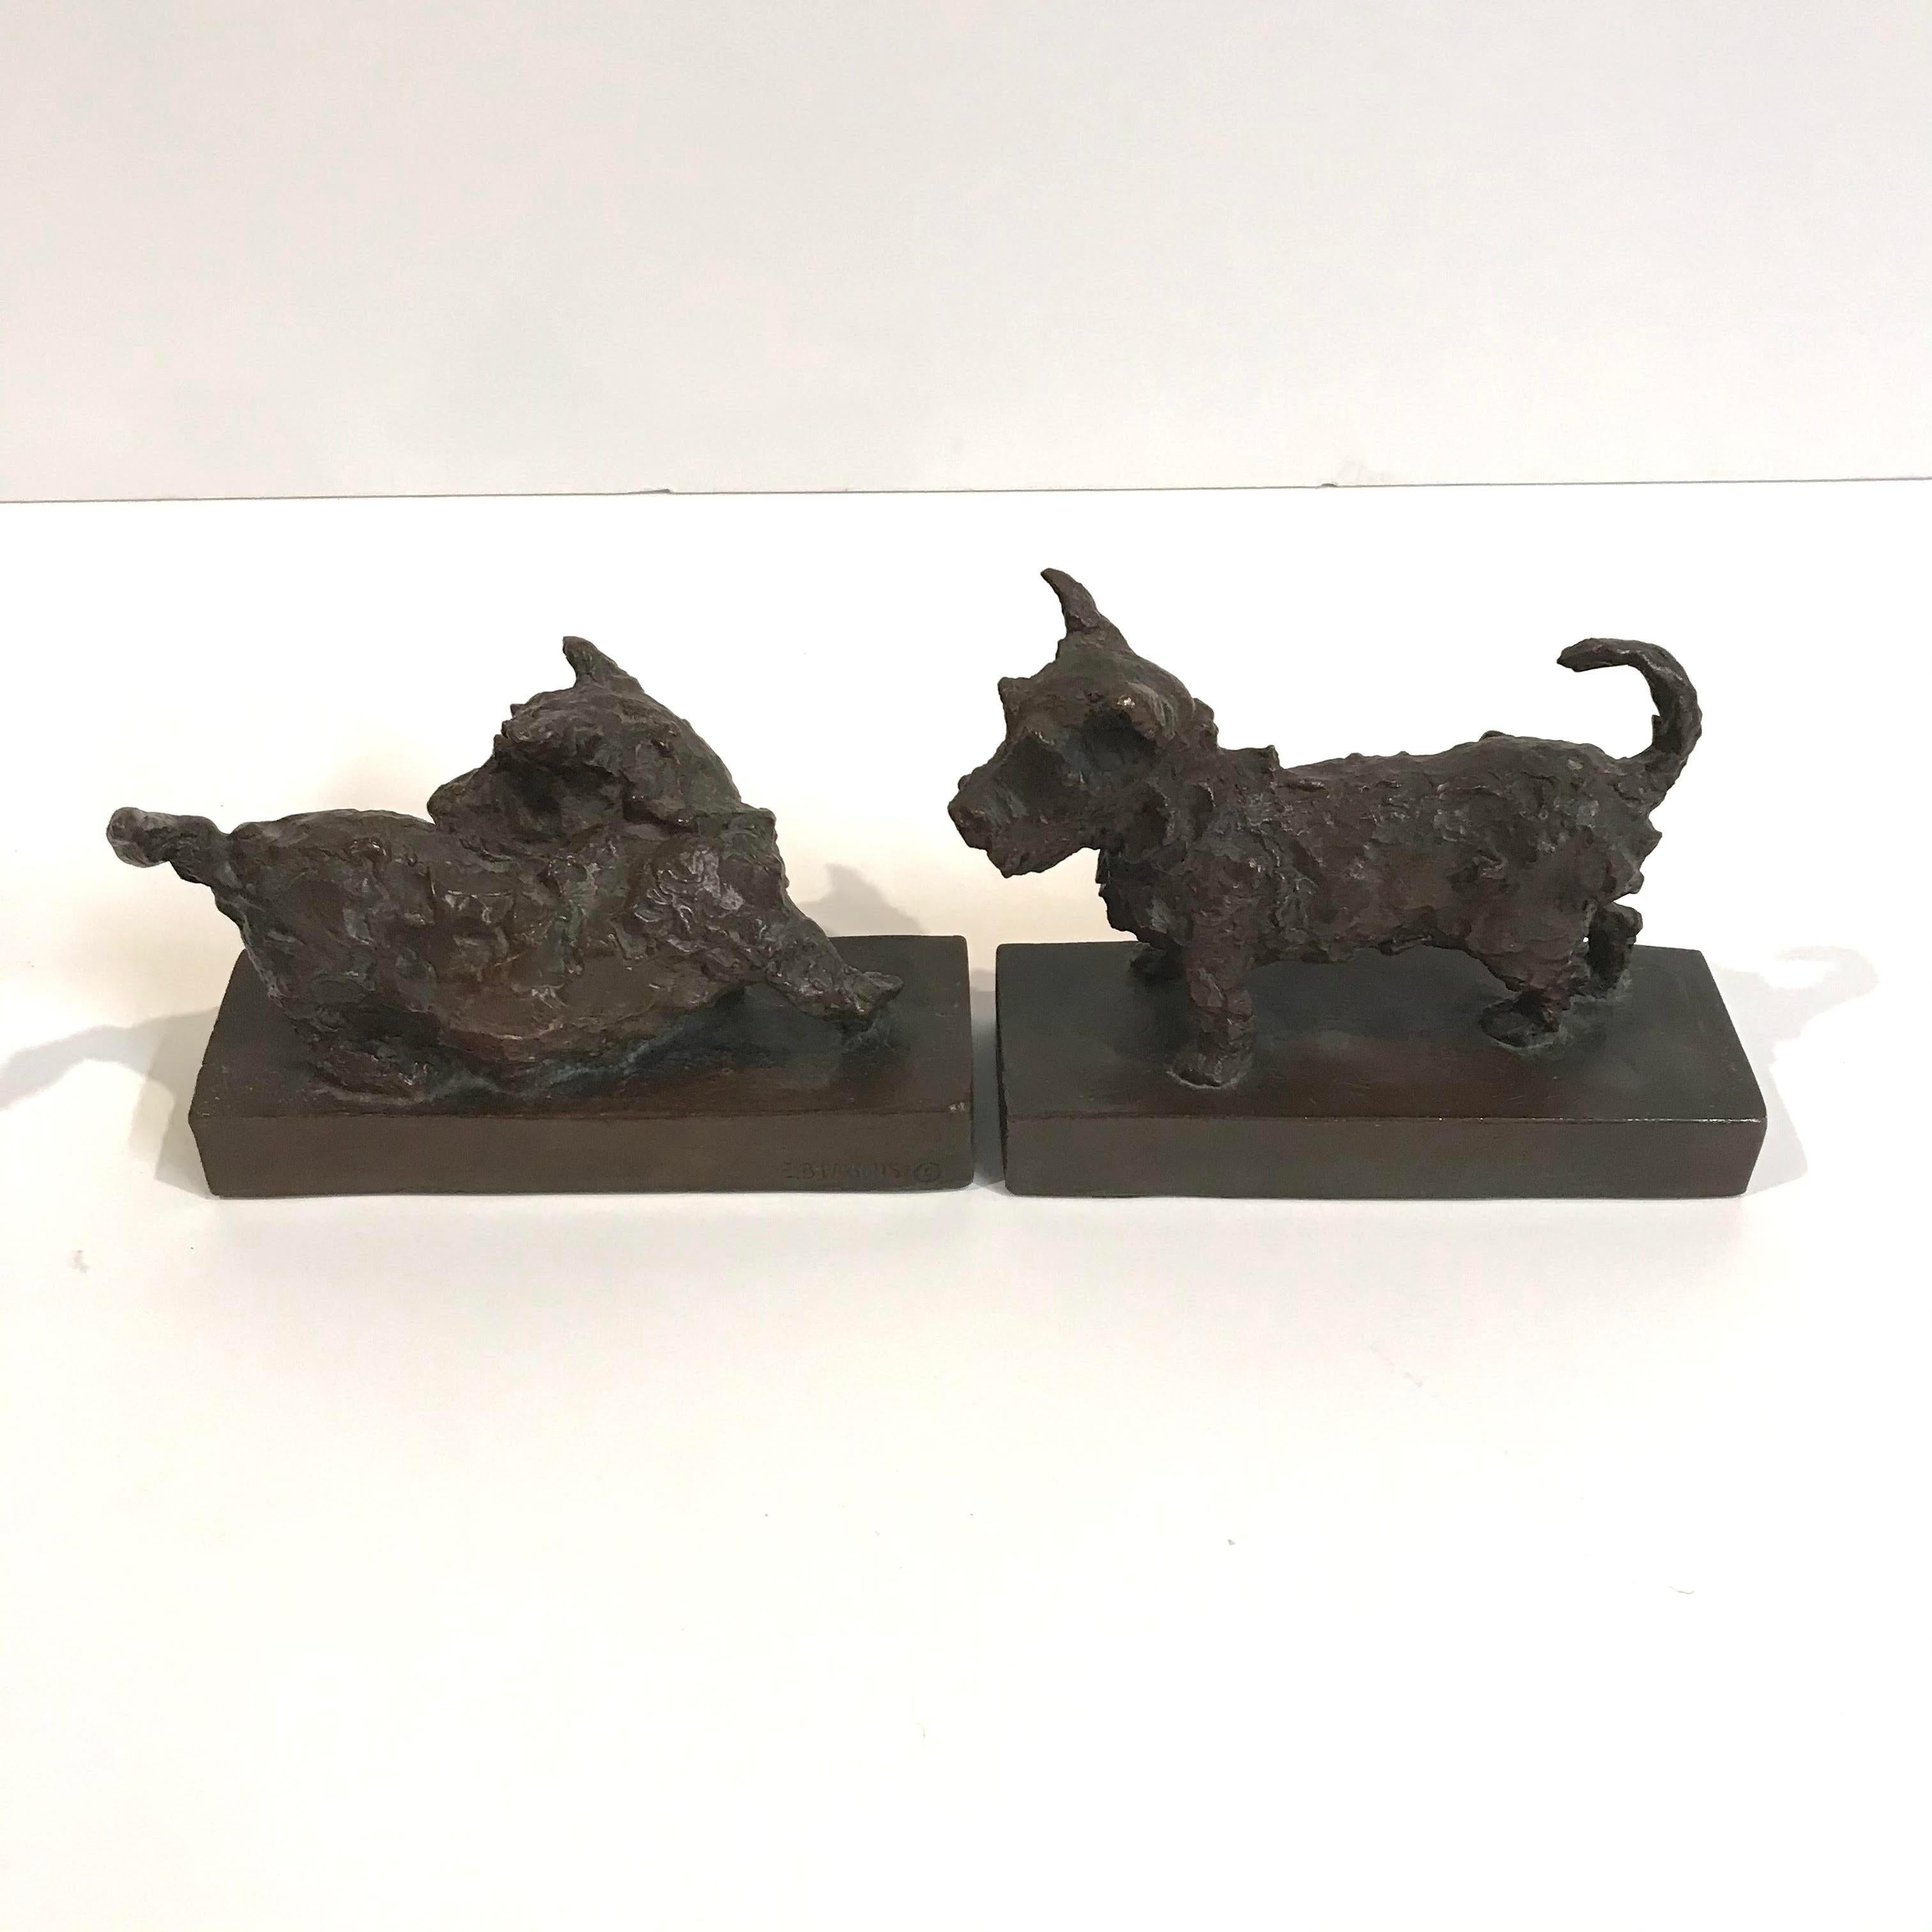 Walking Terrier and Running Terrier: A Pair by Edith Barretto Stevens Parsons 5